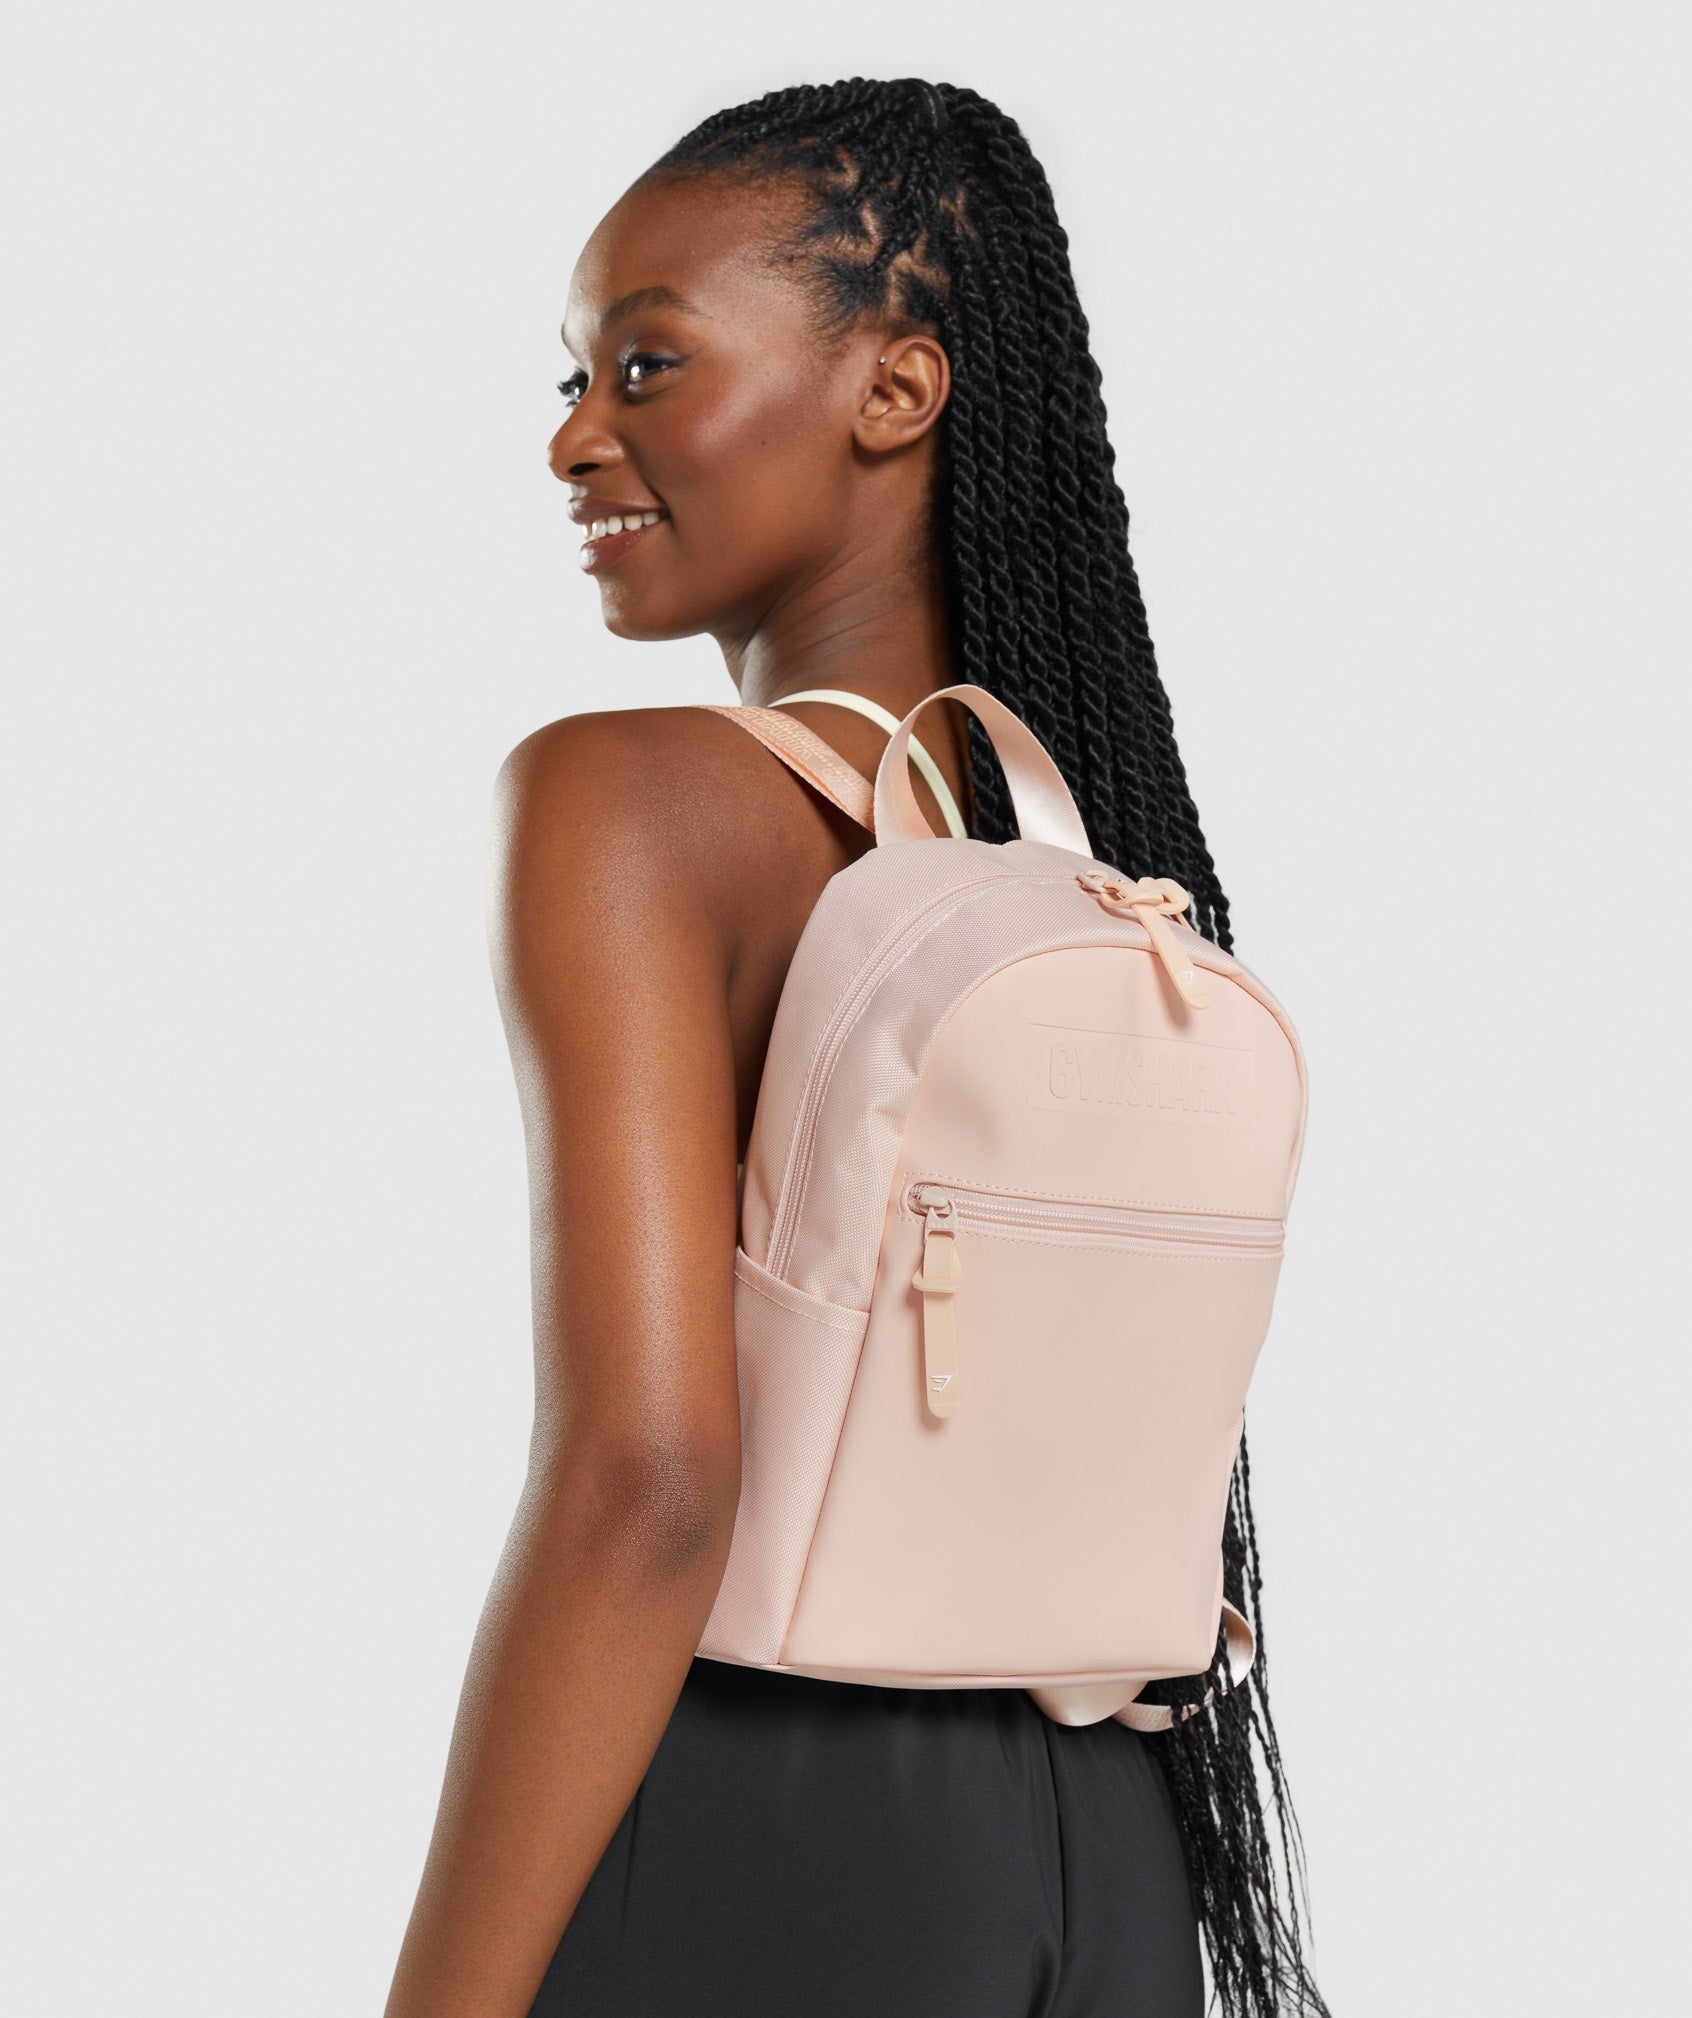 Gymshark Mini Backpack Pink - $15 (50% Off Retail) - From Riley